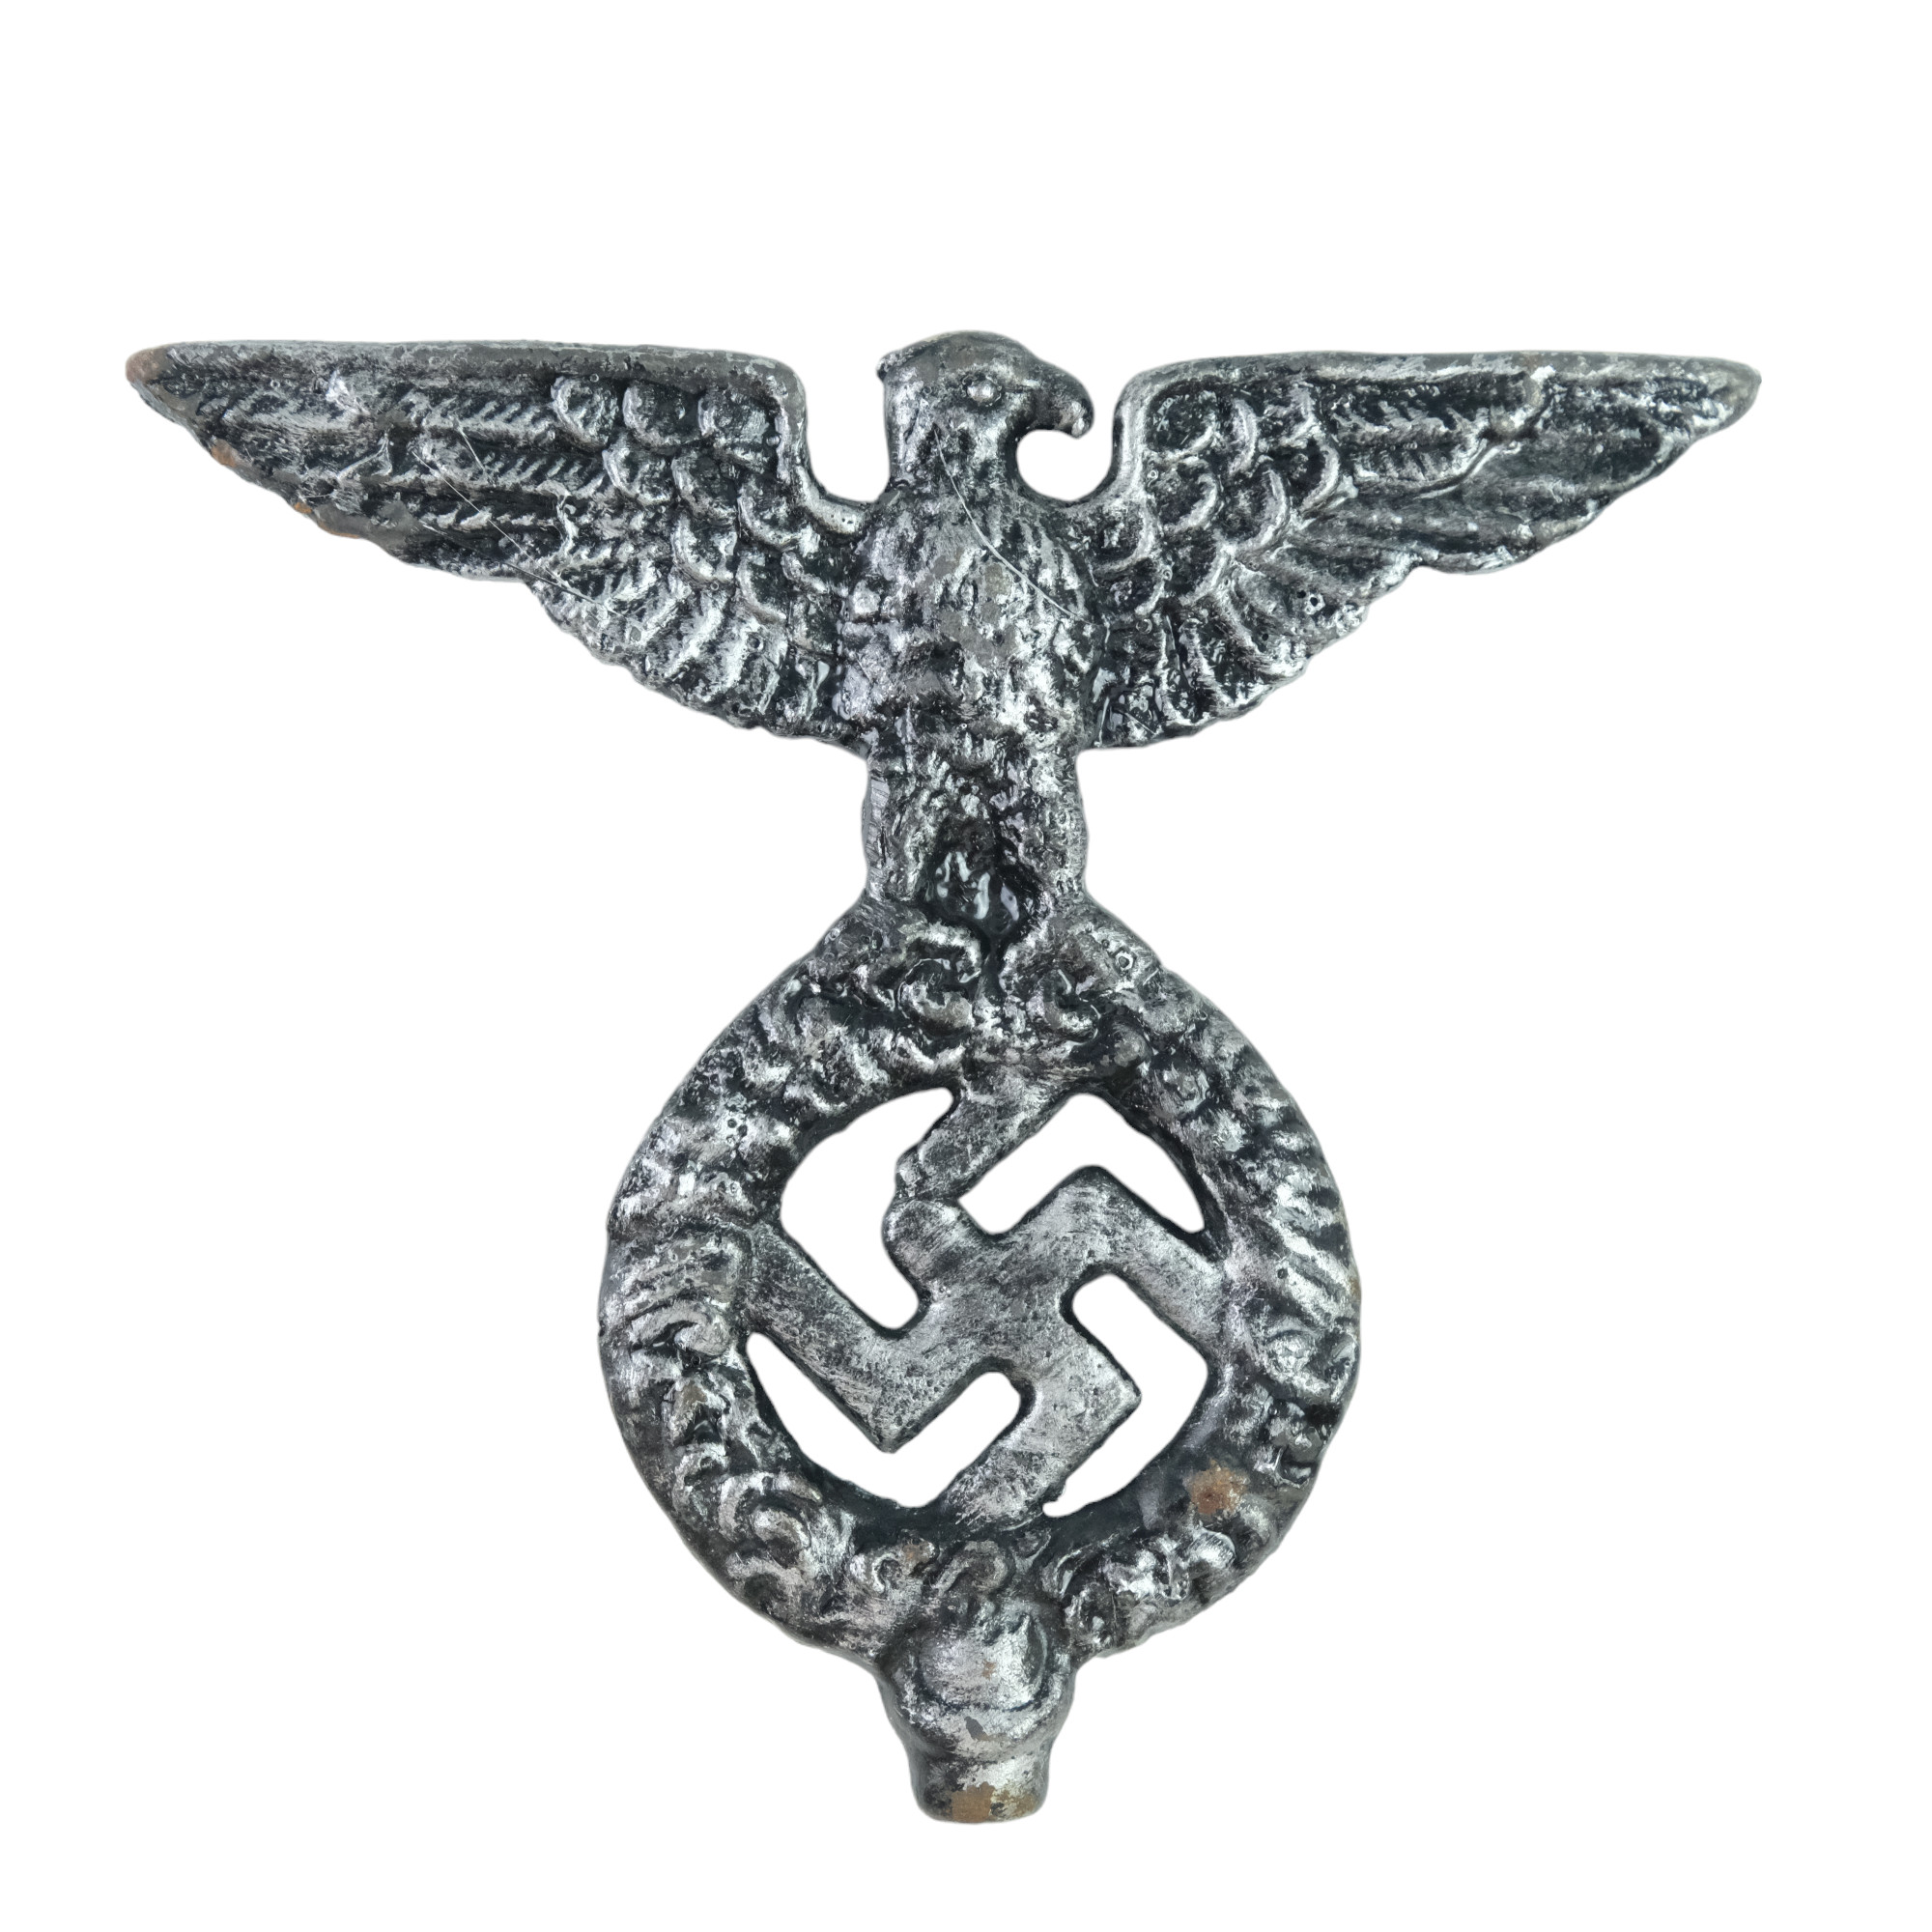 A German Third Reich type banner pole cast iron finial, 16.5 cm, (not period) - Image 2 of 2